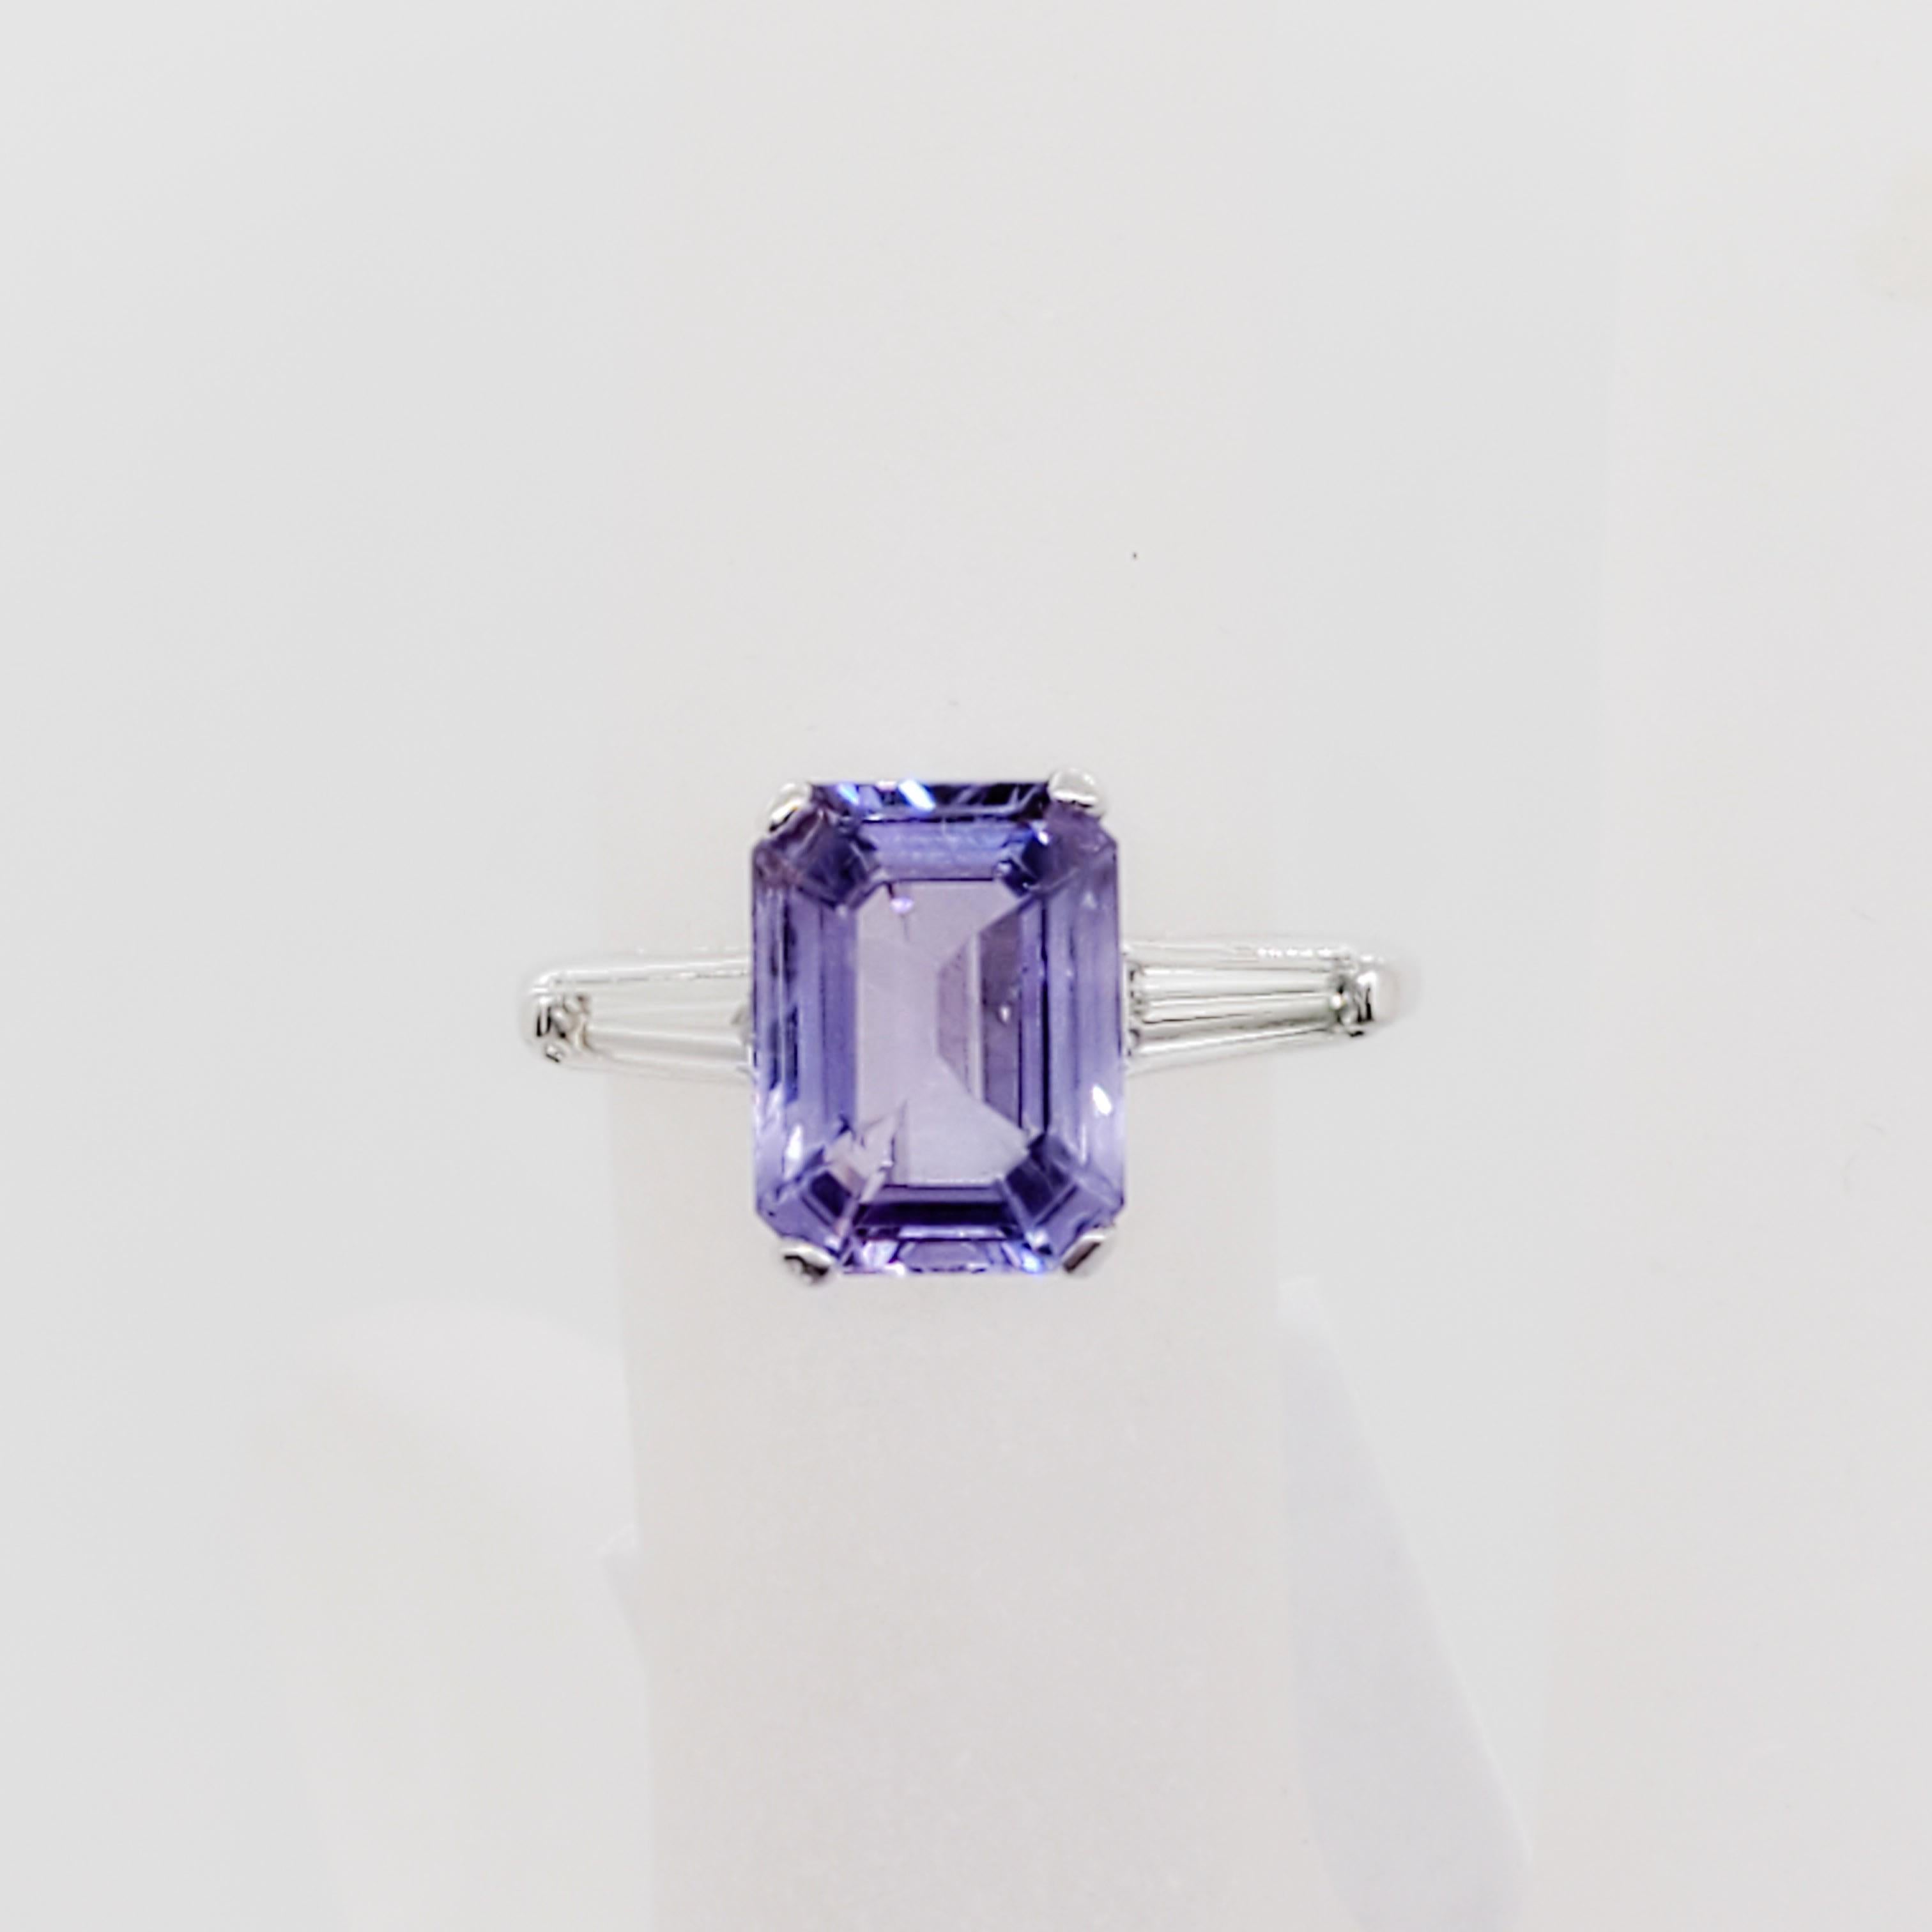 Absolutely gorgeous unheated 3.32 ct. Sri Lanka purple sapphire emerald cut with an excellent color and cut.  0.35 ct. of good quality, white, and bright diamond baguettes in a handmade 18k white gold mounting.  Ring size 4, can be resized. GIA